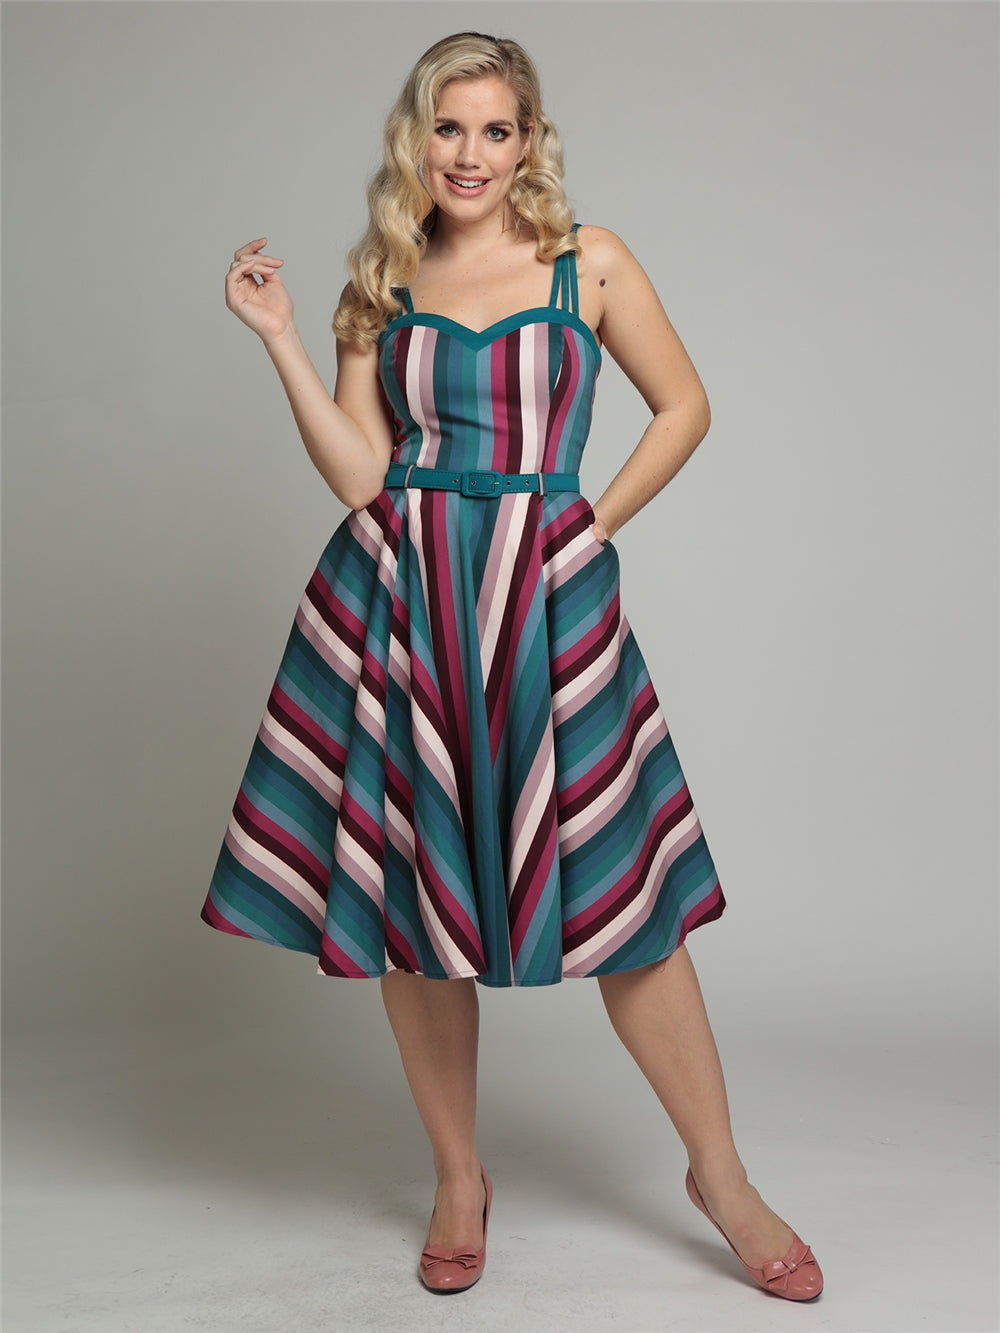 blonde vintage pin up model wearing a turquoise, pink, white and burgundy asymmetrical striped swing dress and pink pumps